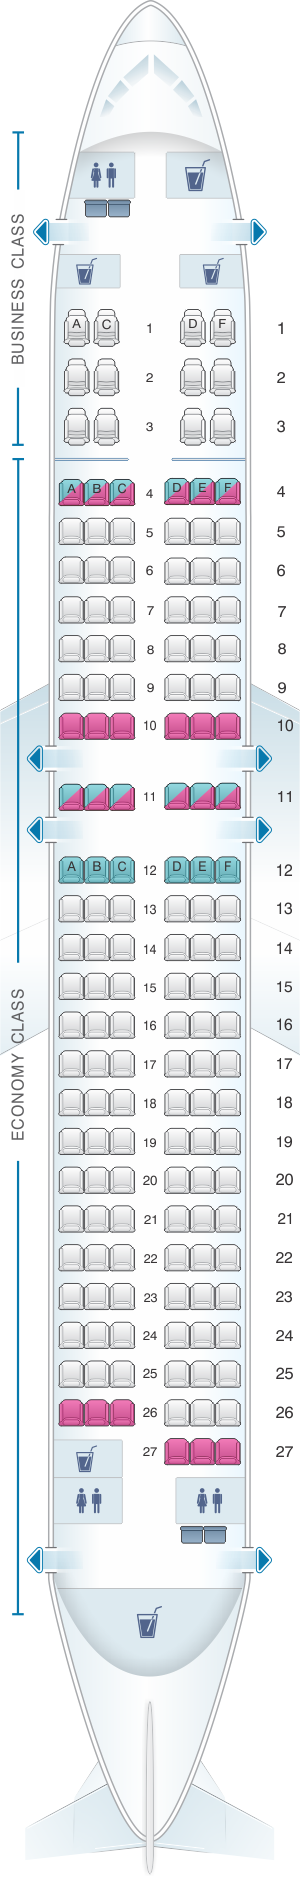 turkish airlines seat assignment online